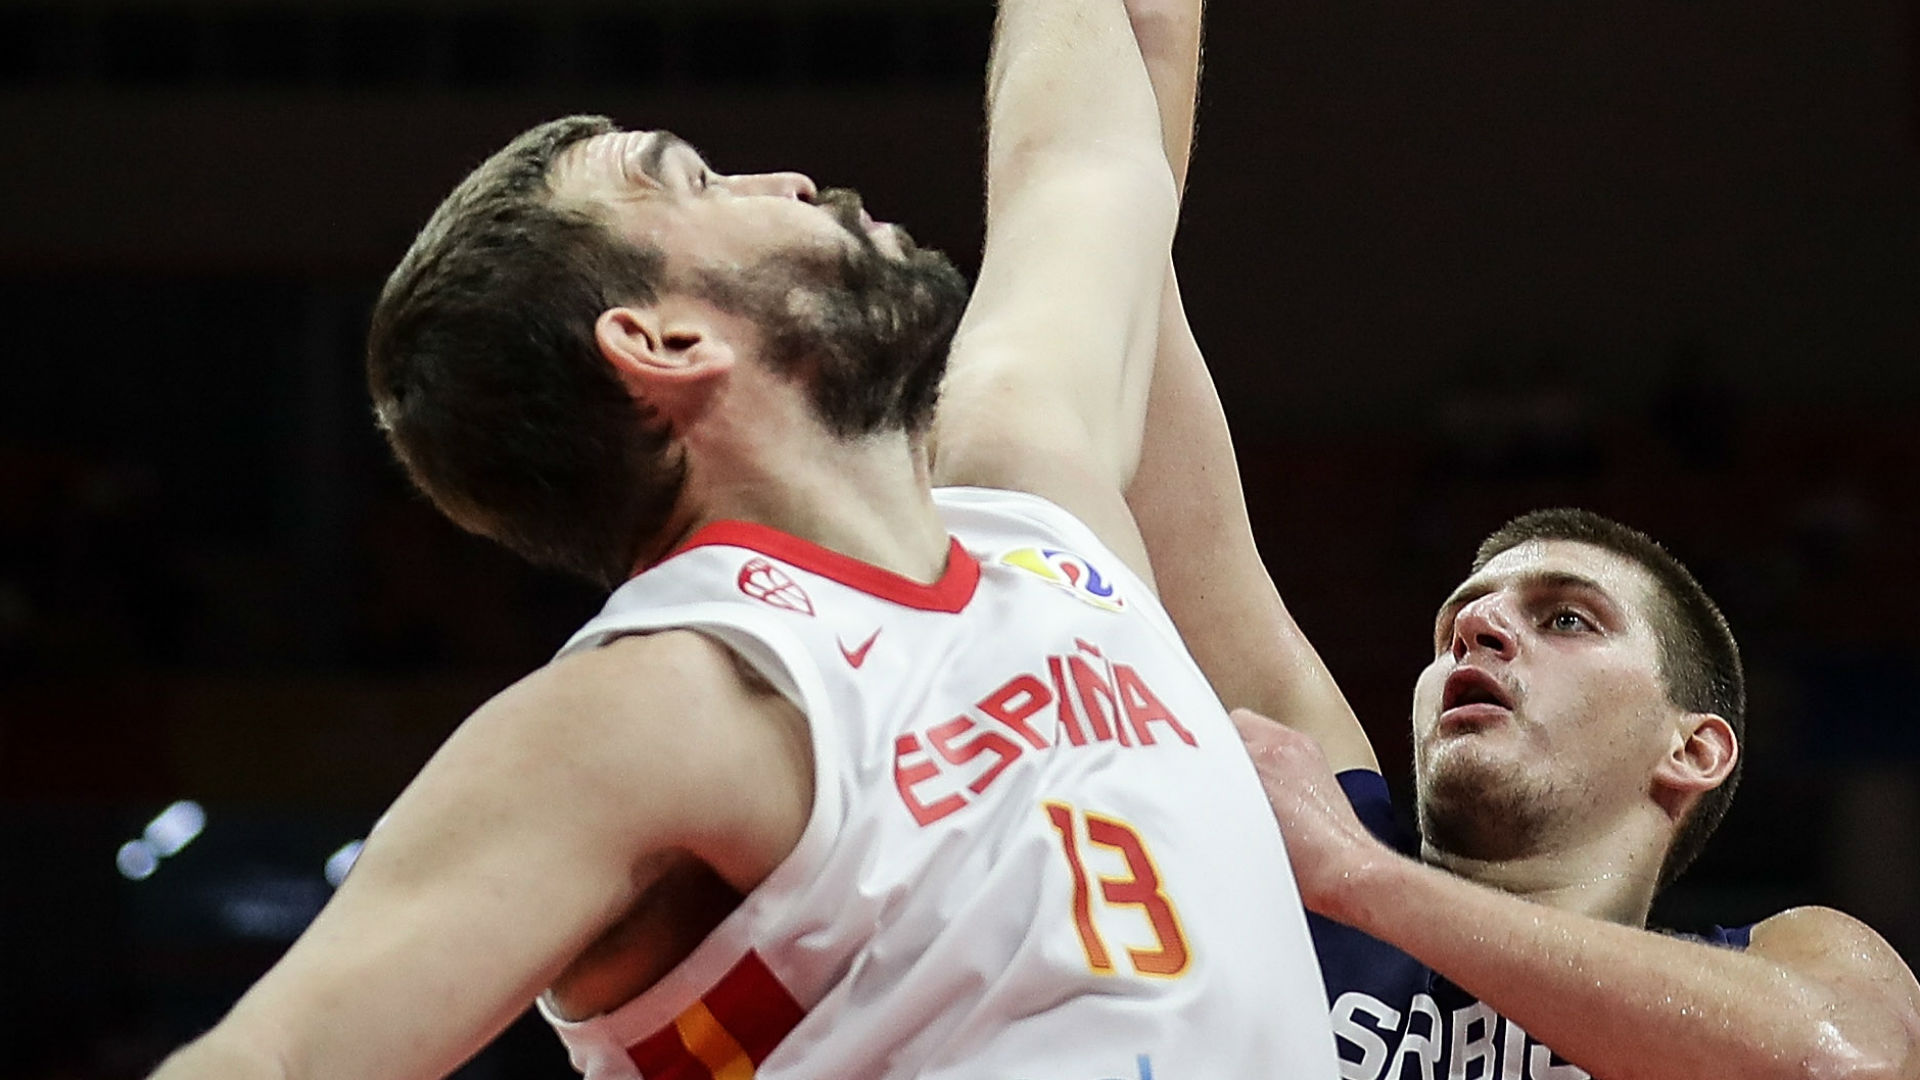 Marc Gasol challenges a shot by Nikola Jokic during Spain's win over Serbia.